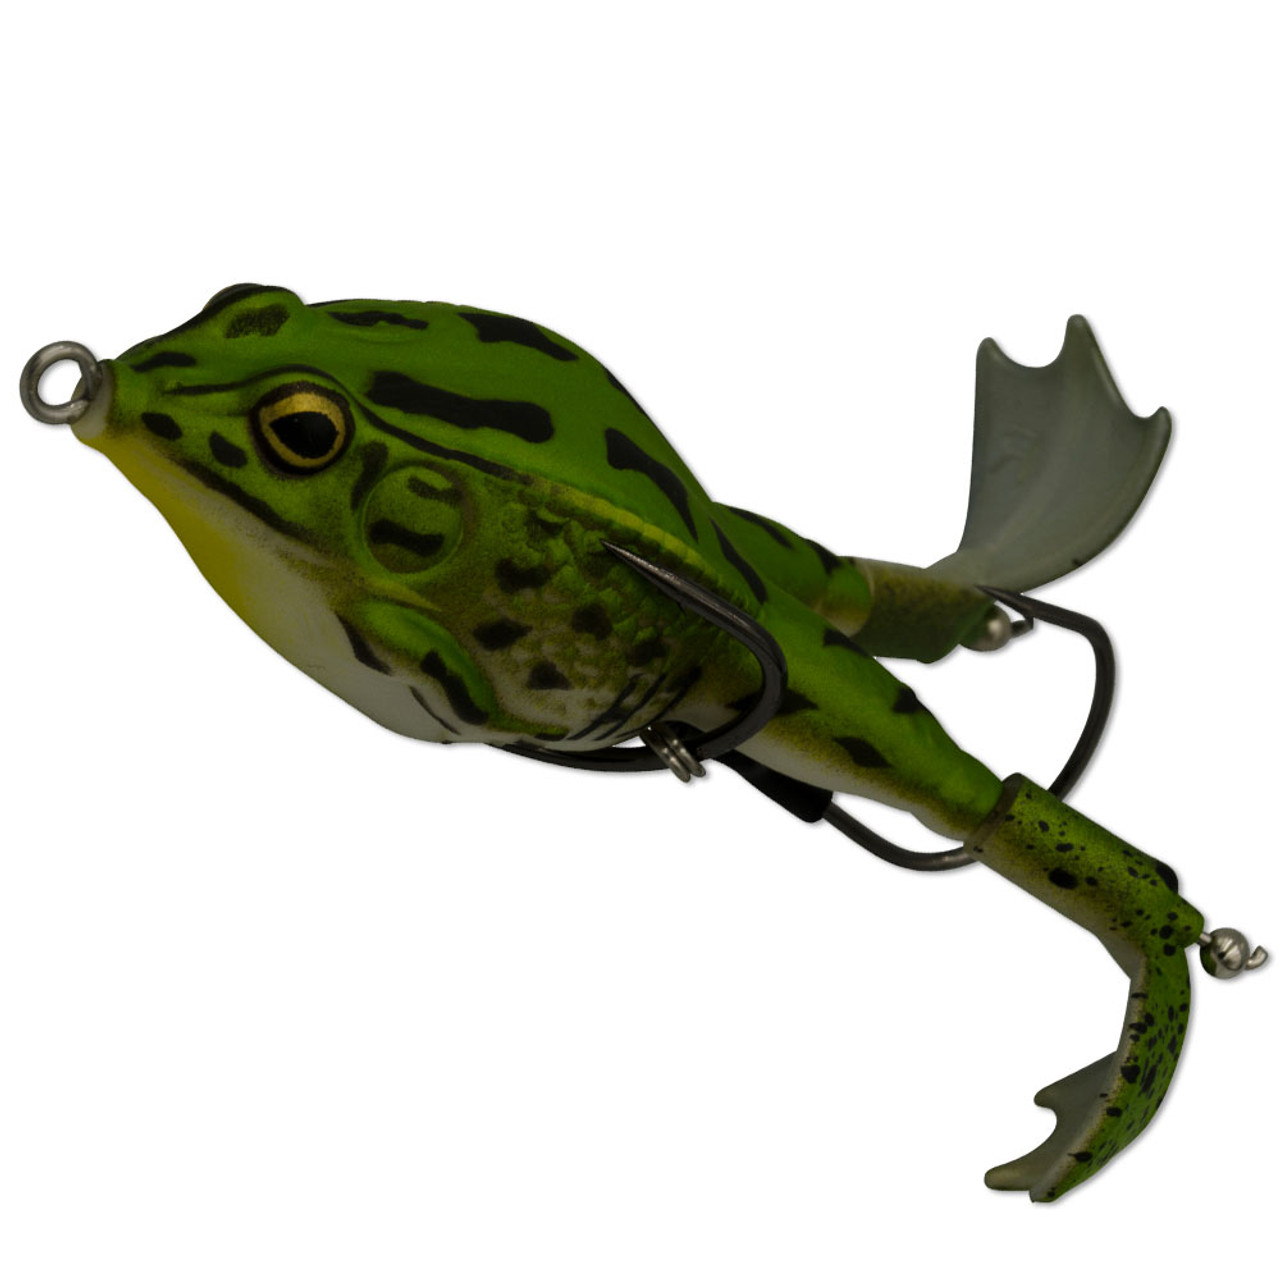 https://cdn11.bigcommerce.com/s-55834/images/stencil/1280x1280/products/4826/14396/lunkerhunt-prop-frog-lure__32174.1553718072.jpg?c=2